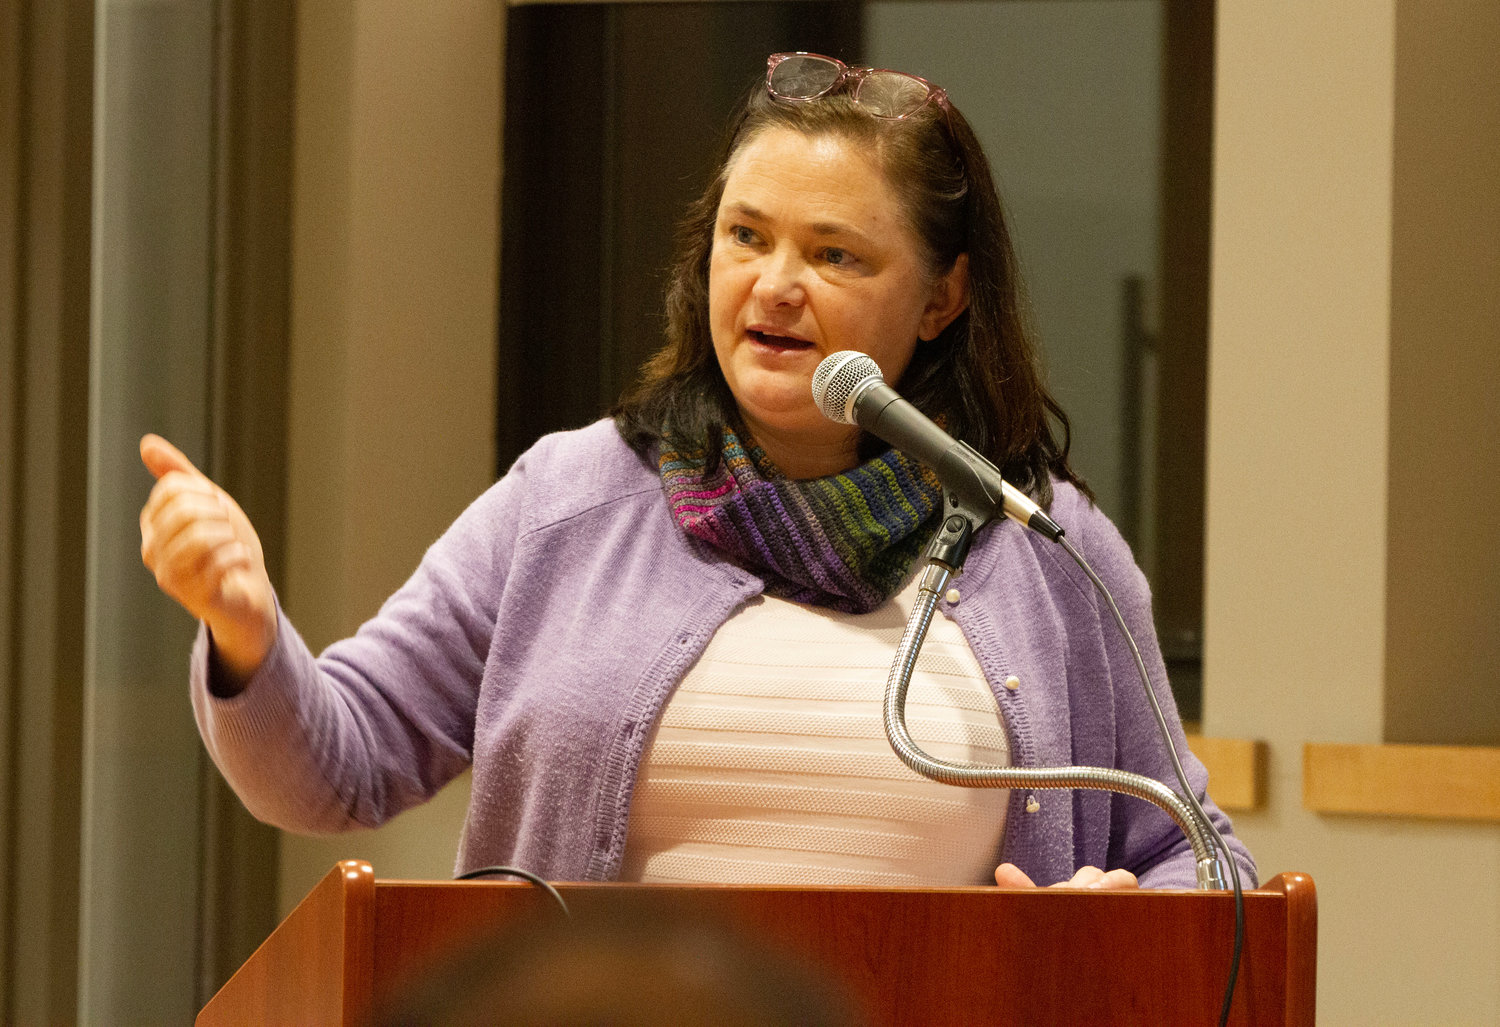 Barrington Town Planner Teresa Crean speaks during the Planning Board workshop on Tuesday night, March 28.